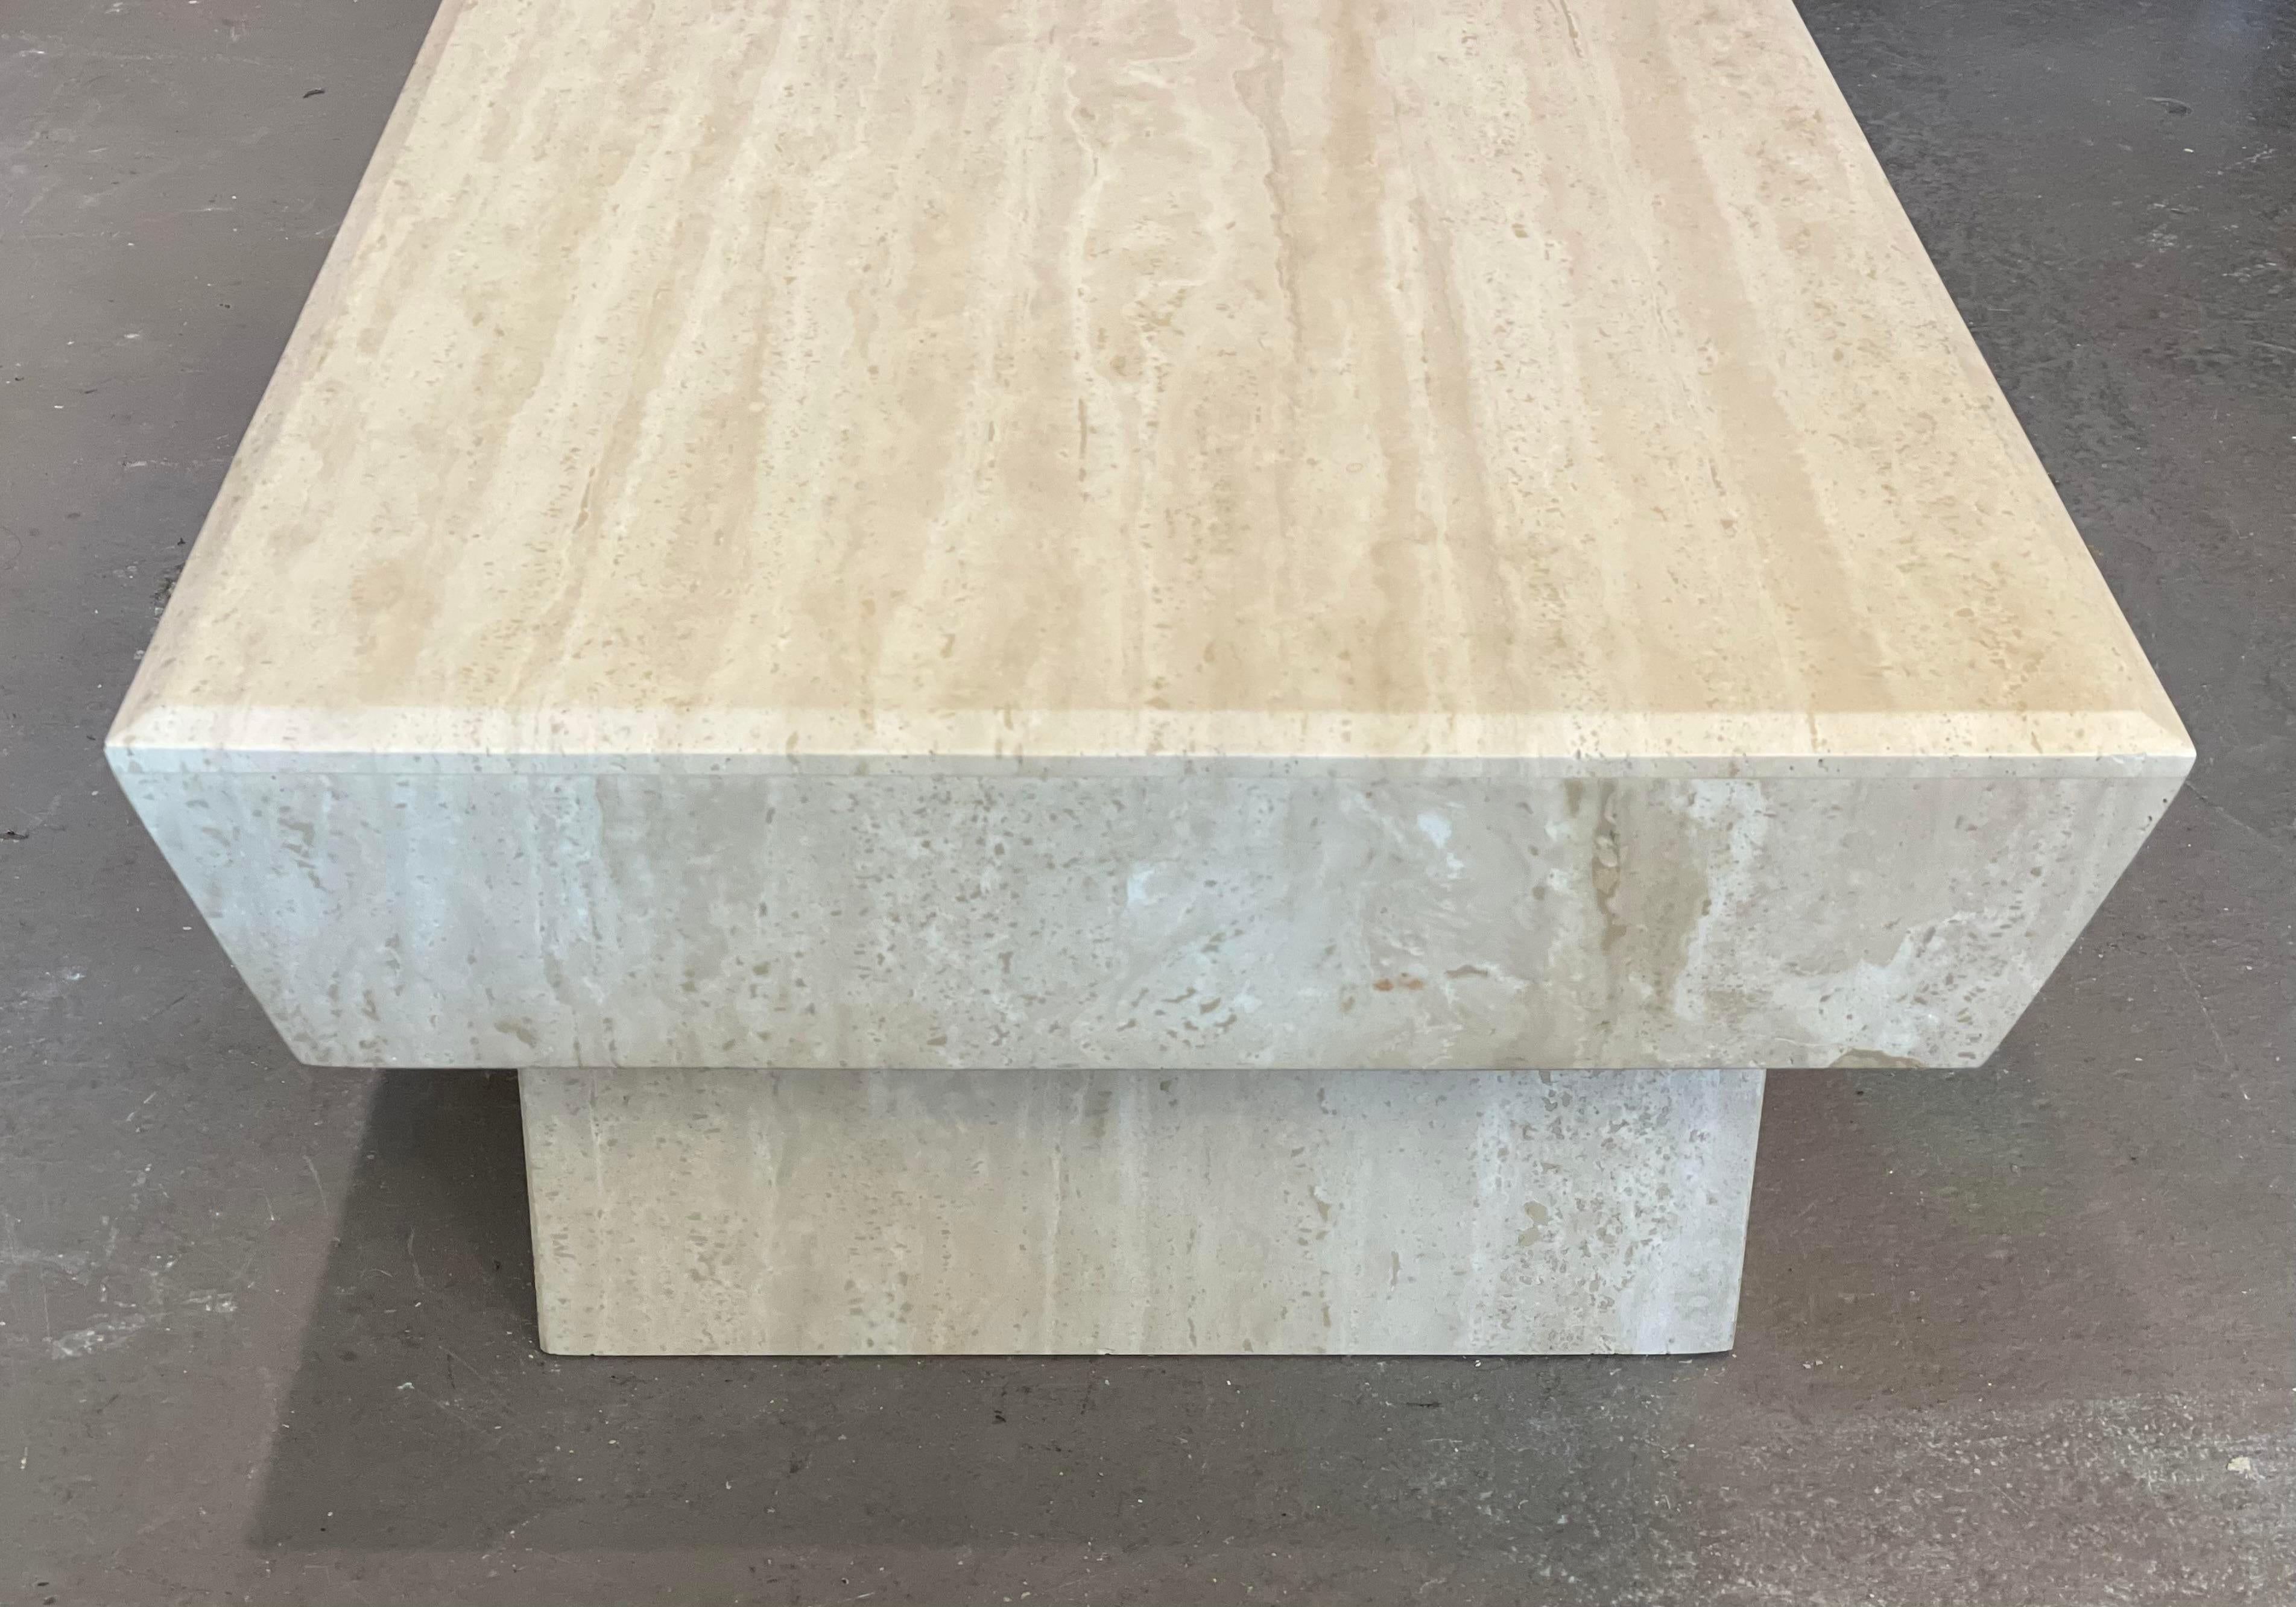 So so cool! I love the double bases and angles edges of this coffee table. The soft travertine contrasts with the shape lines. Excellent condition.